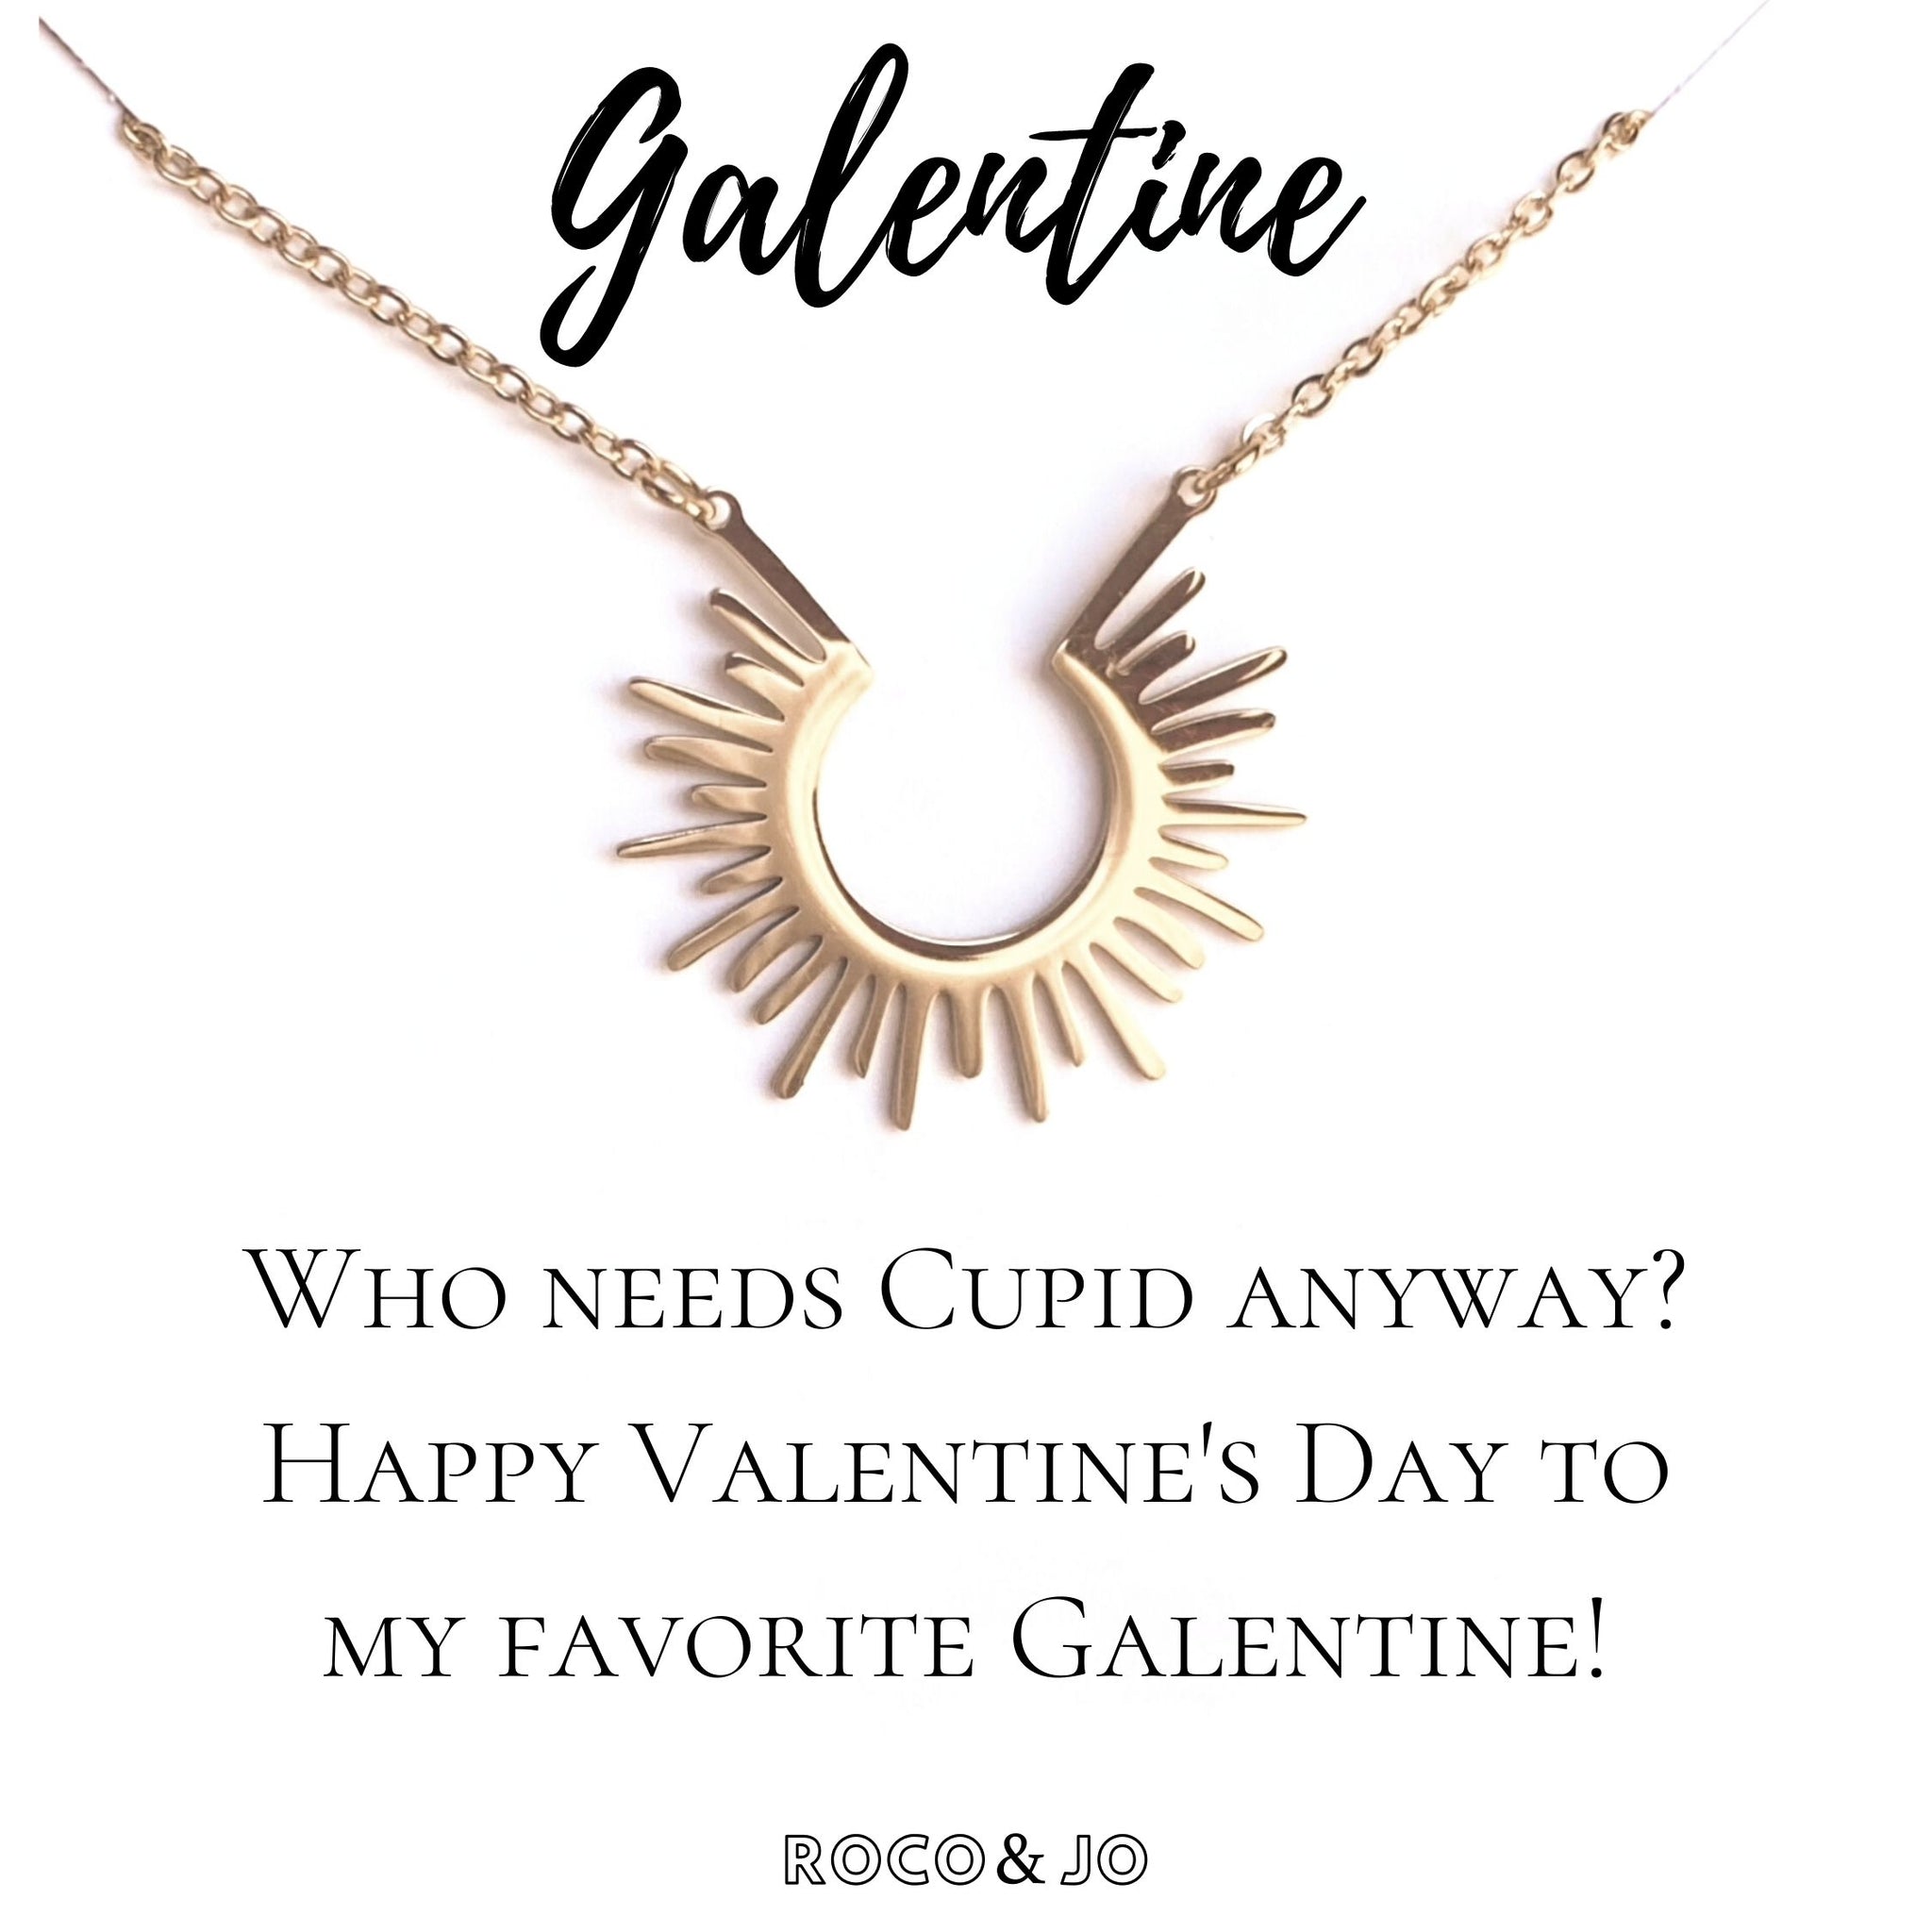 10 Valentine's Day Gift Ideas for Sisters & Best Friends - Latina Mom in NYC